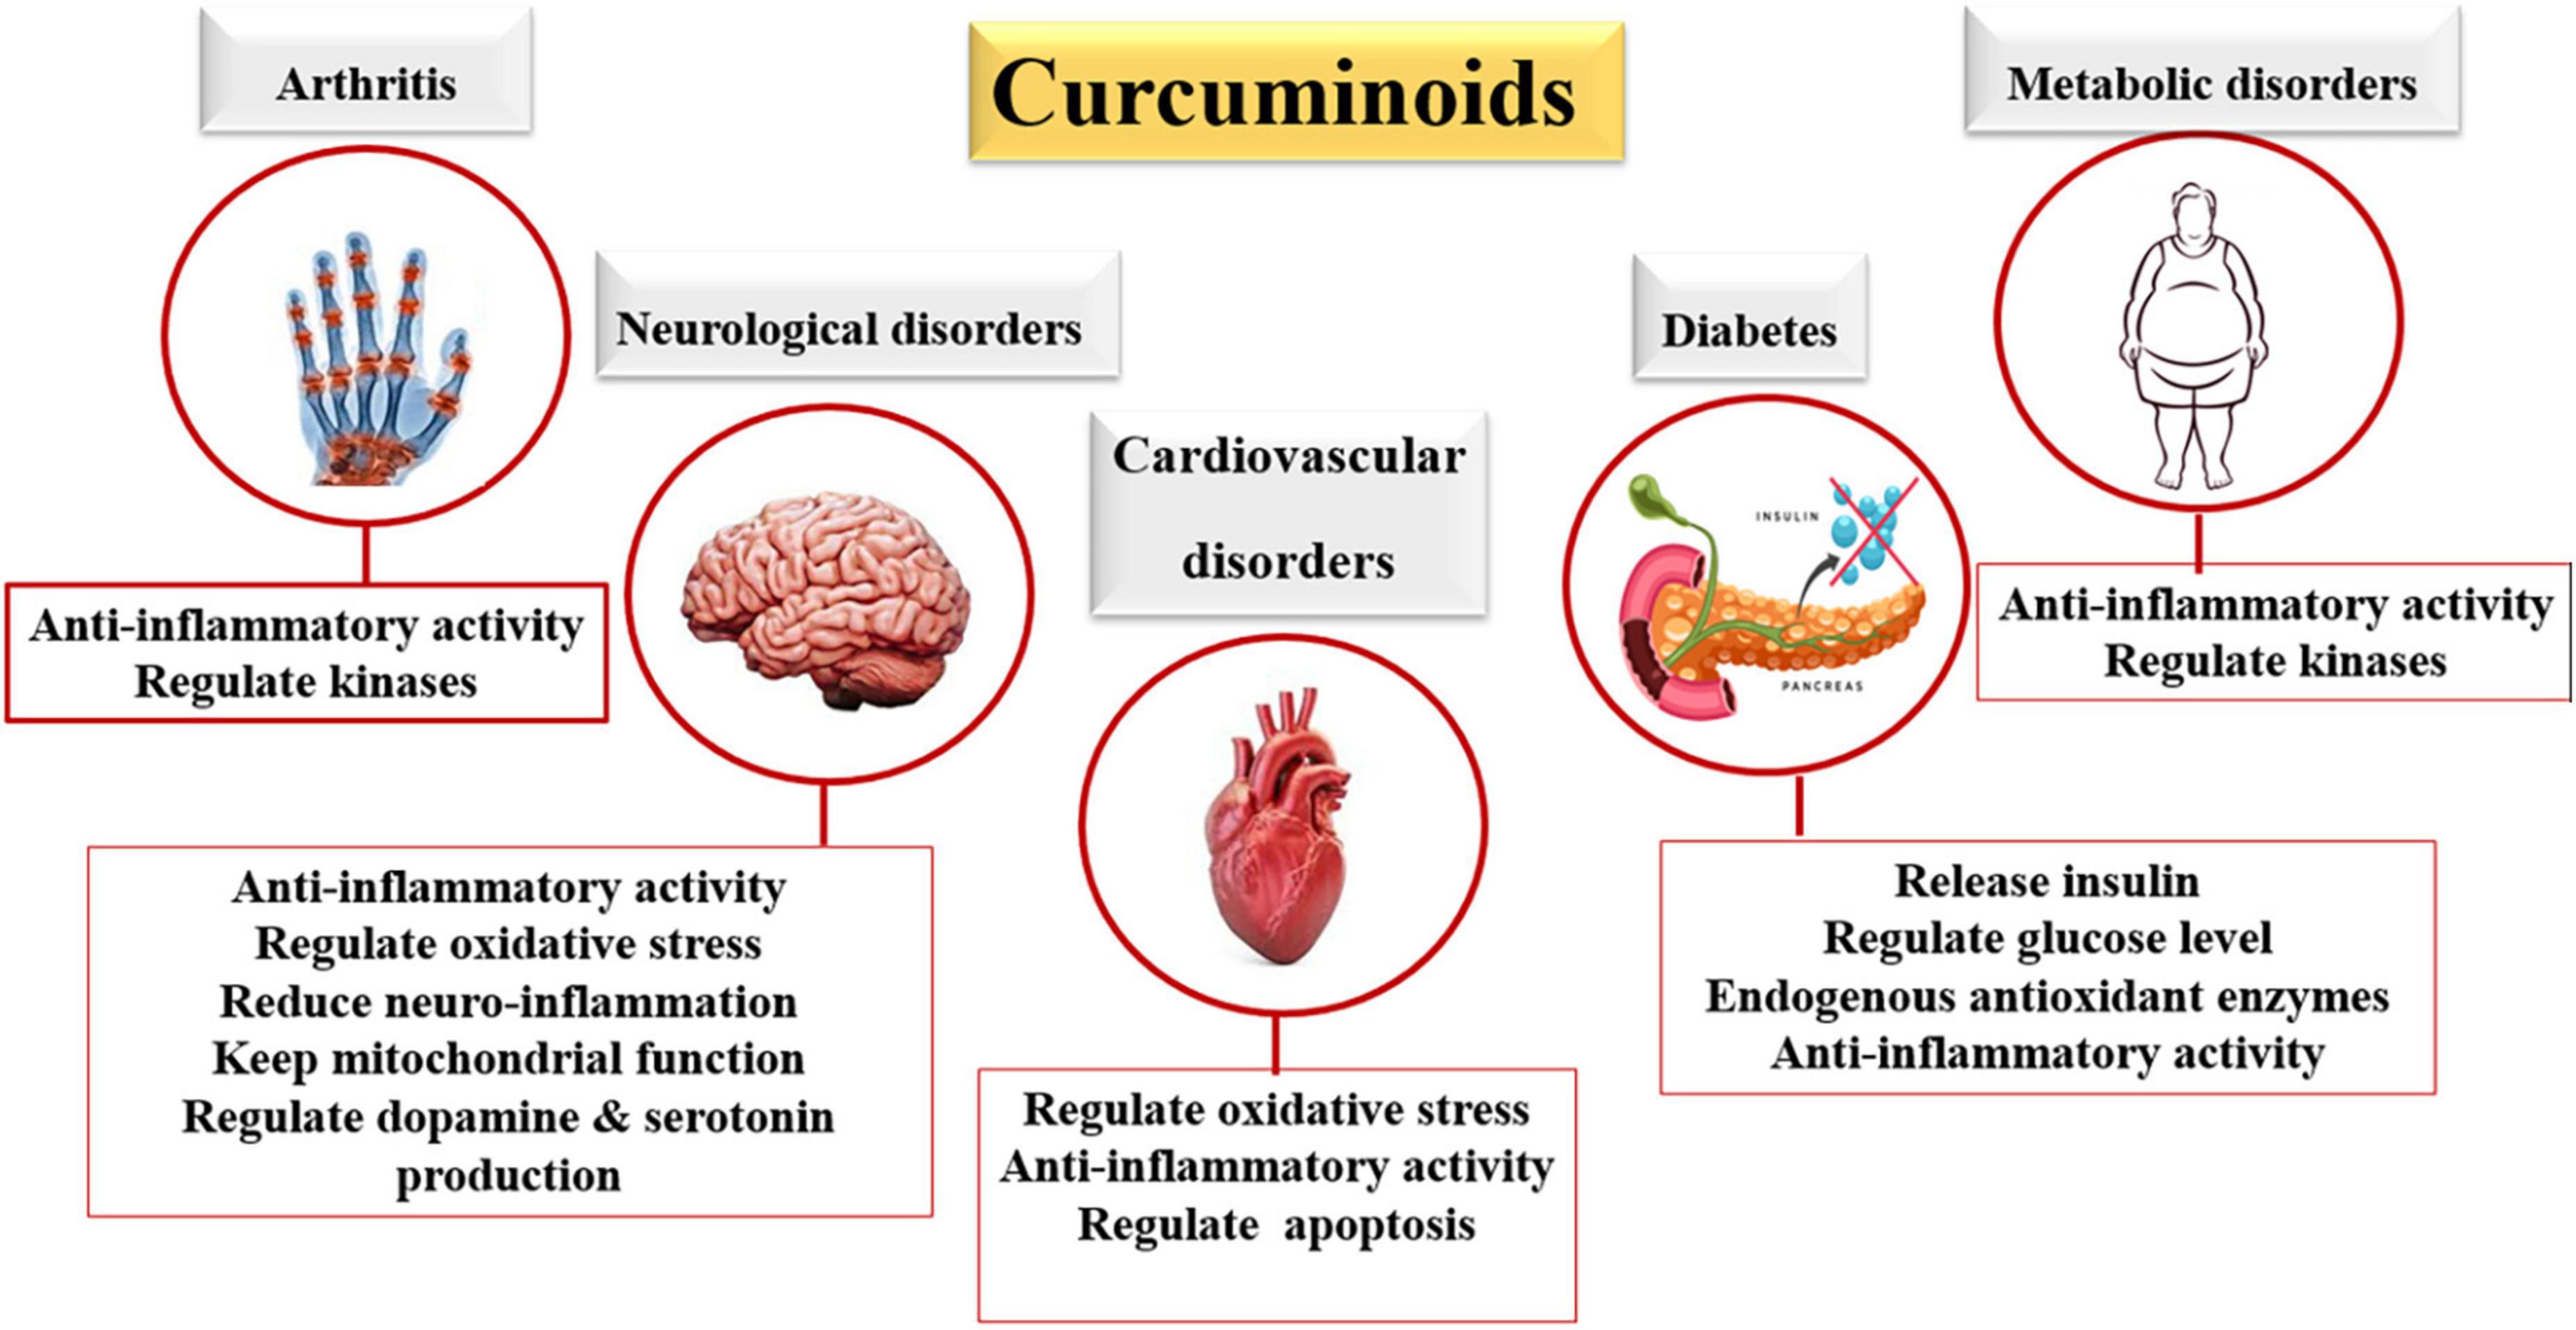 Role of curcumin are actually turmeric benefits which are widely researched.